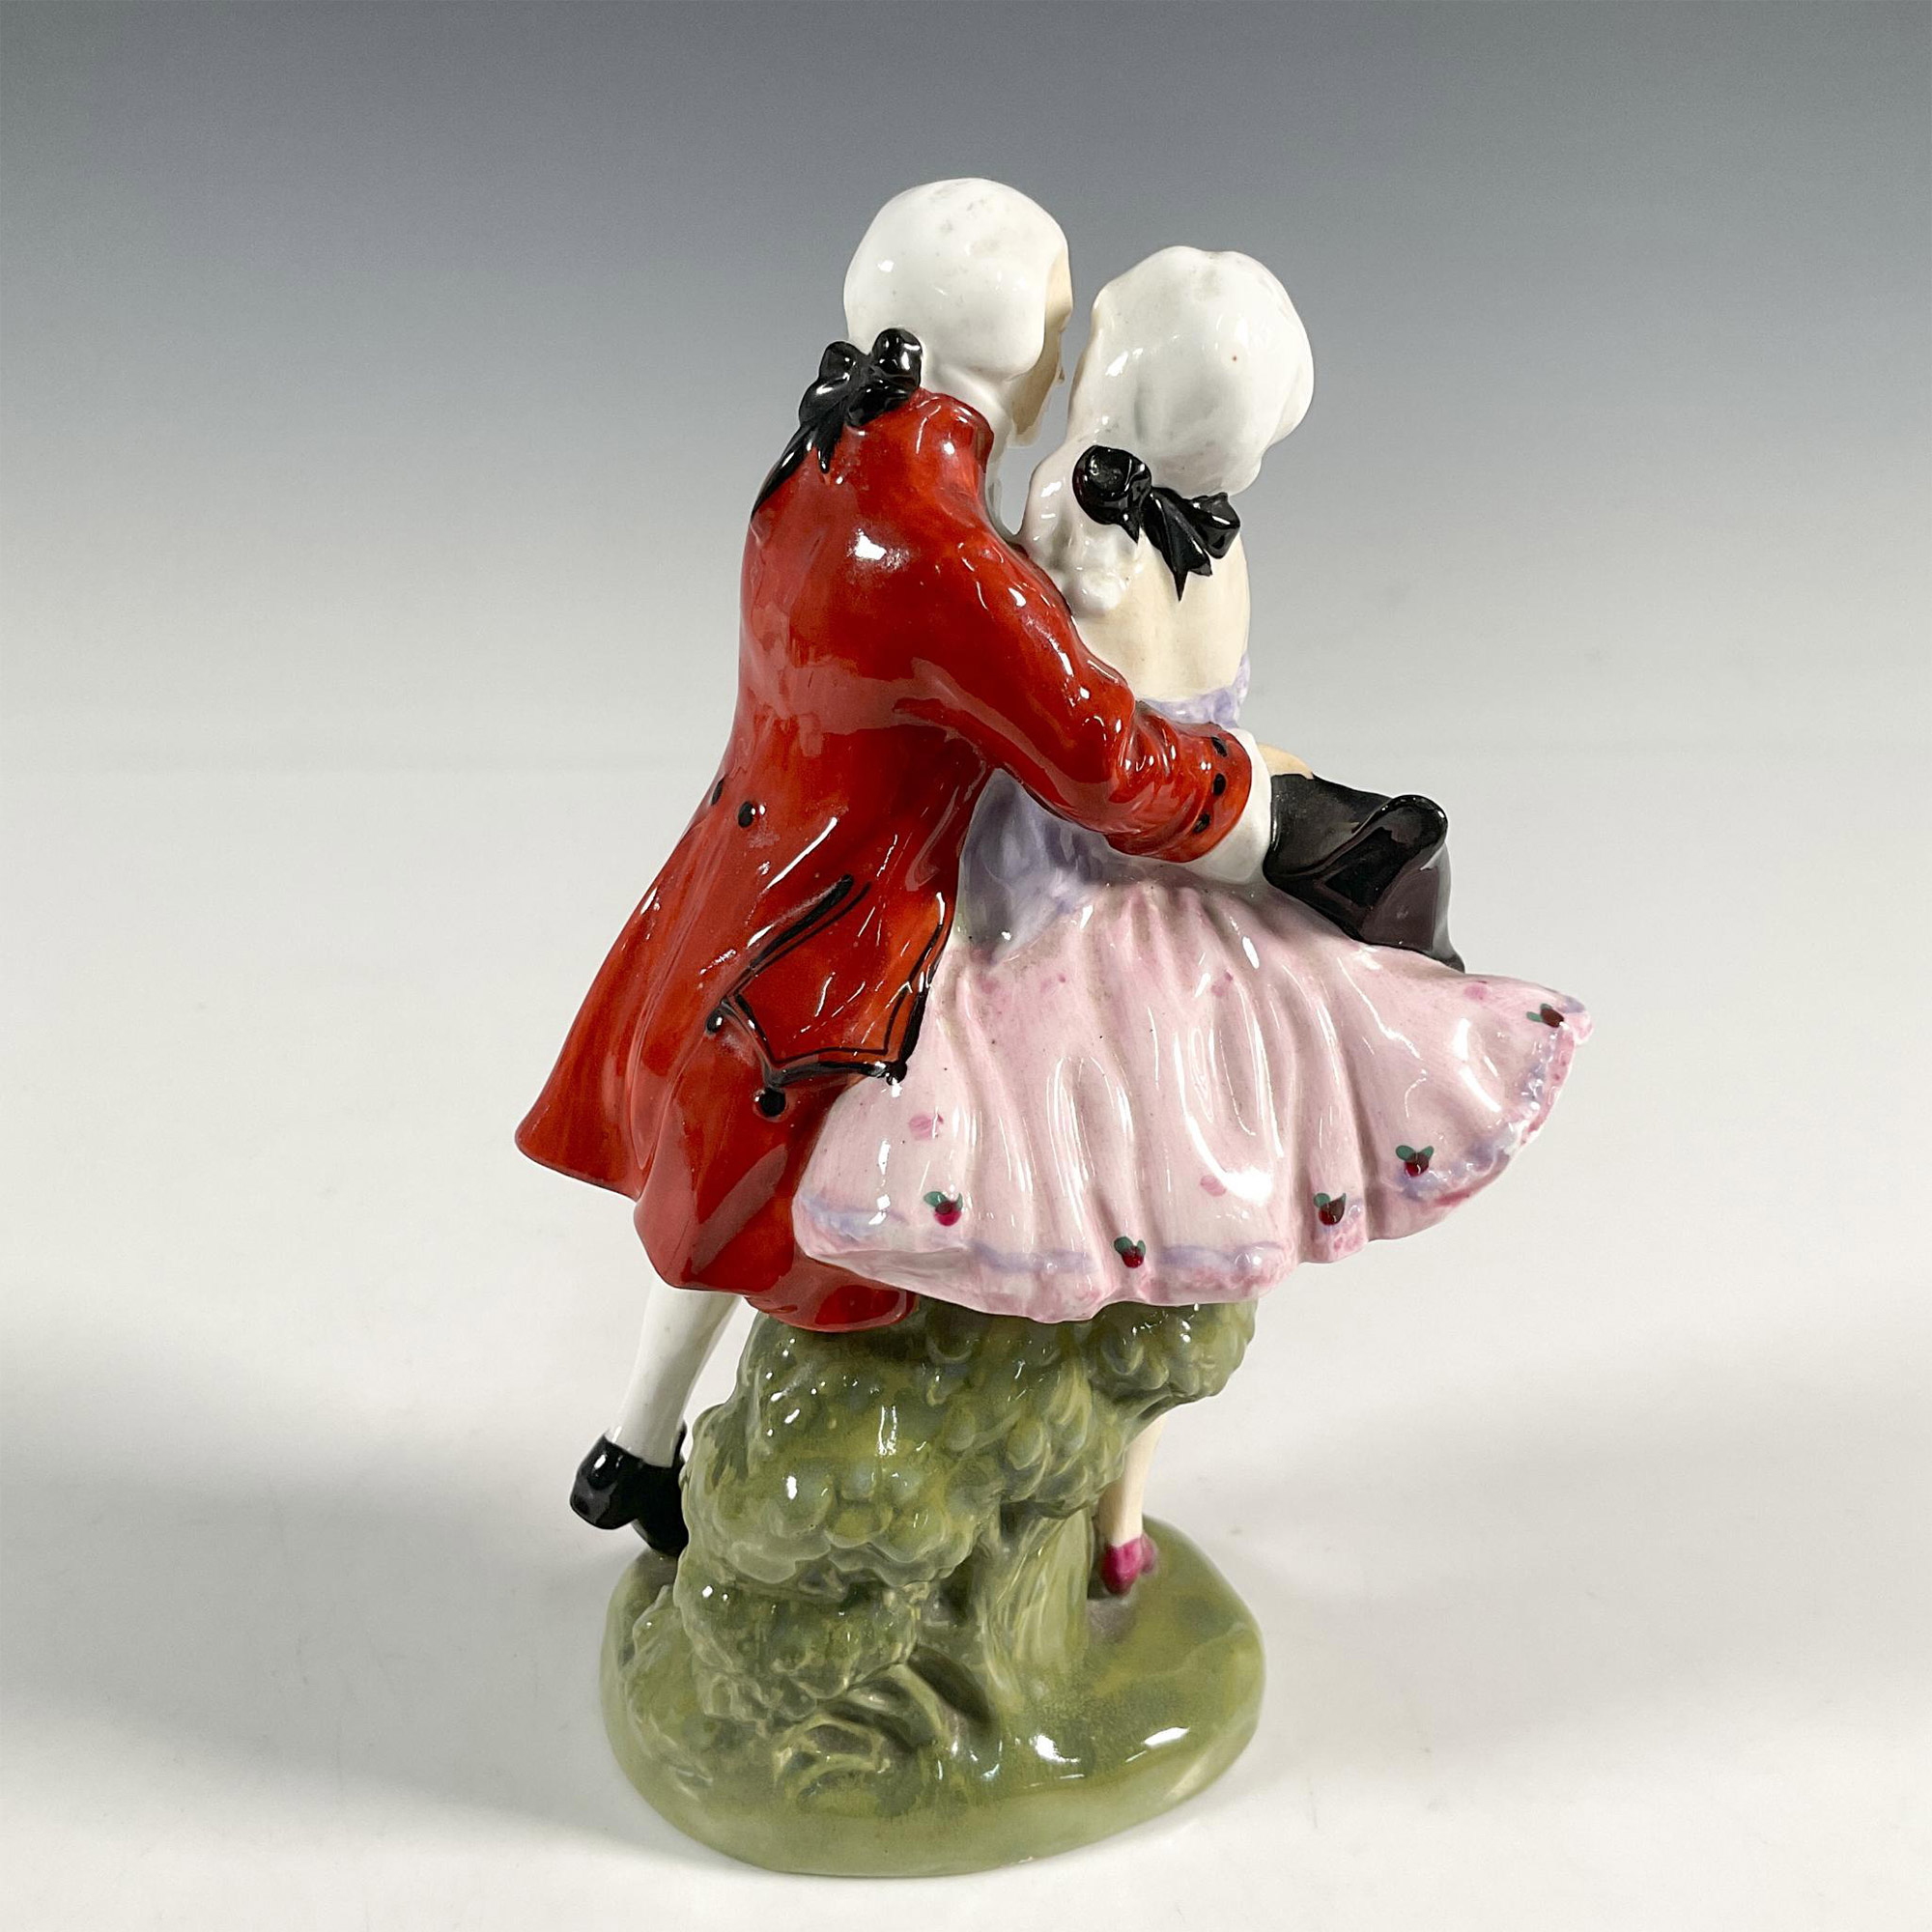 Perfect Pair HN581 - Royal Doulton Figurine - Image 2 of 3